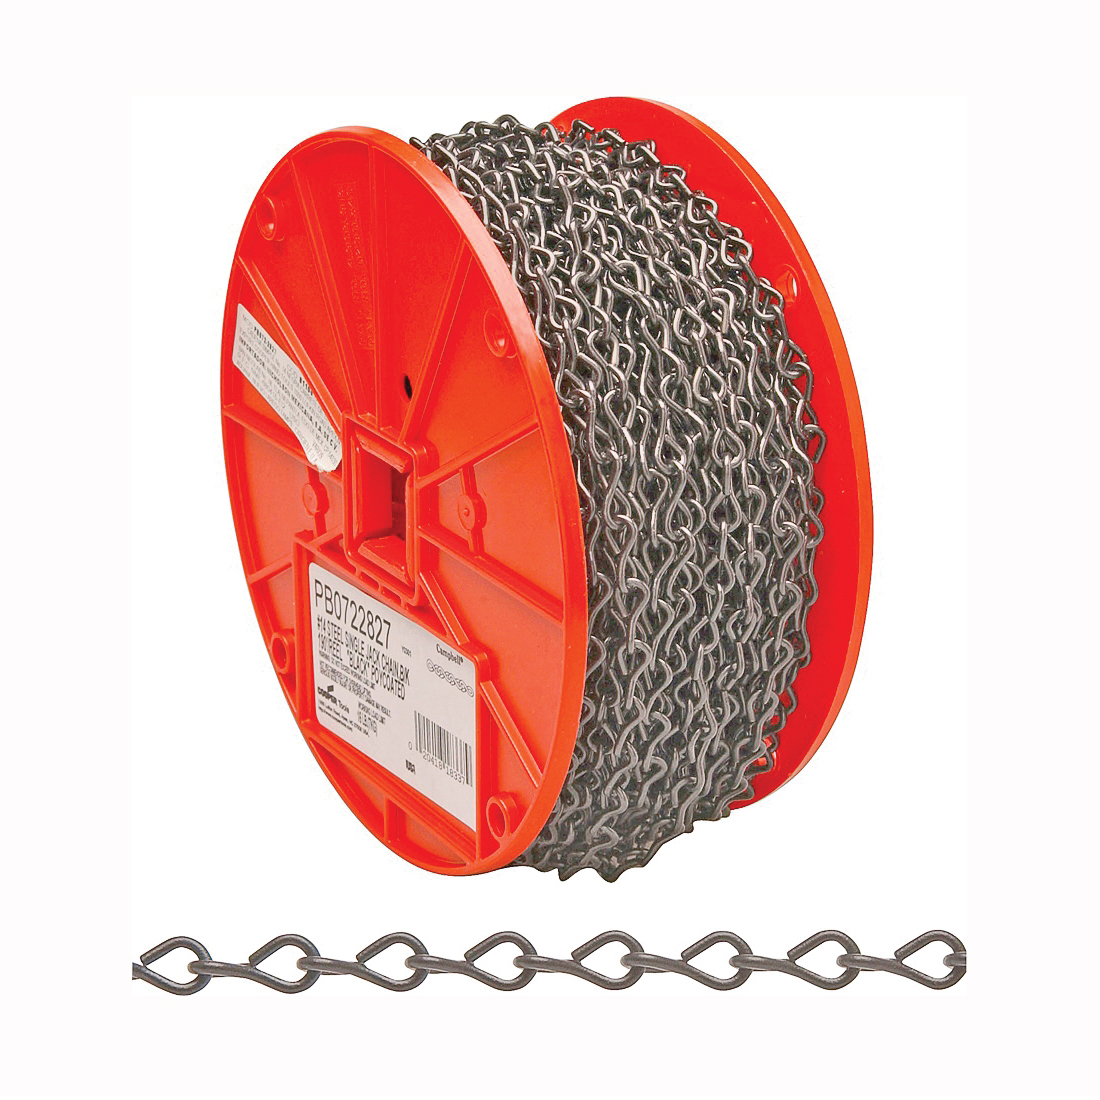 PB0722827 Jack Chain, #14, Steel, Poly-Coated, 16 lb Working Load